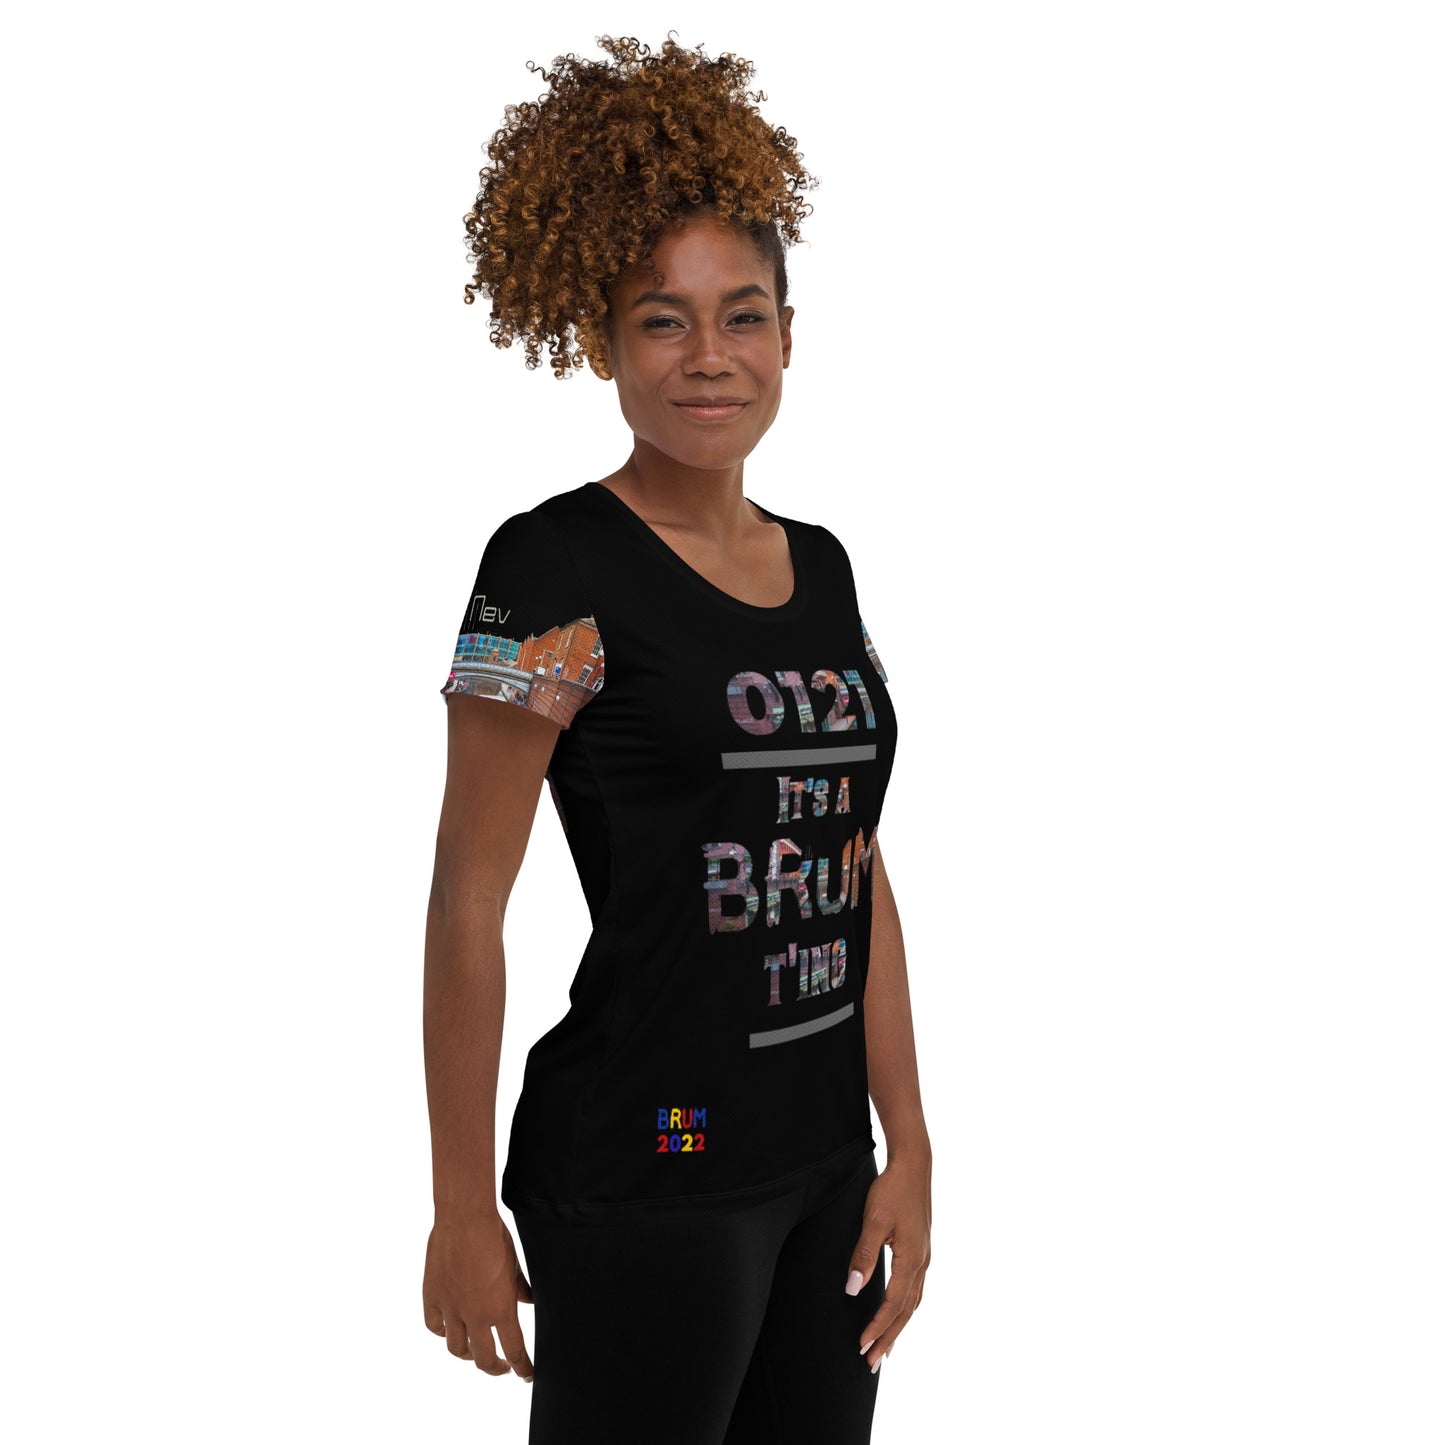 0121 It's A Brum T'ing All-Over Print Women's Athletic T-shirt